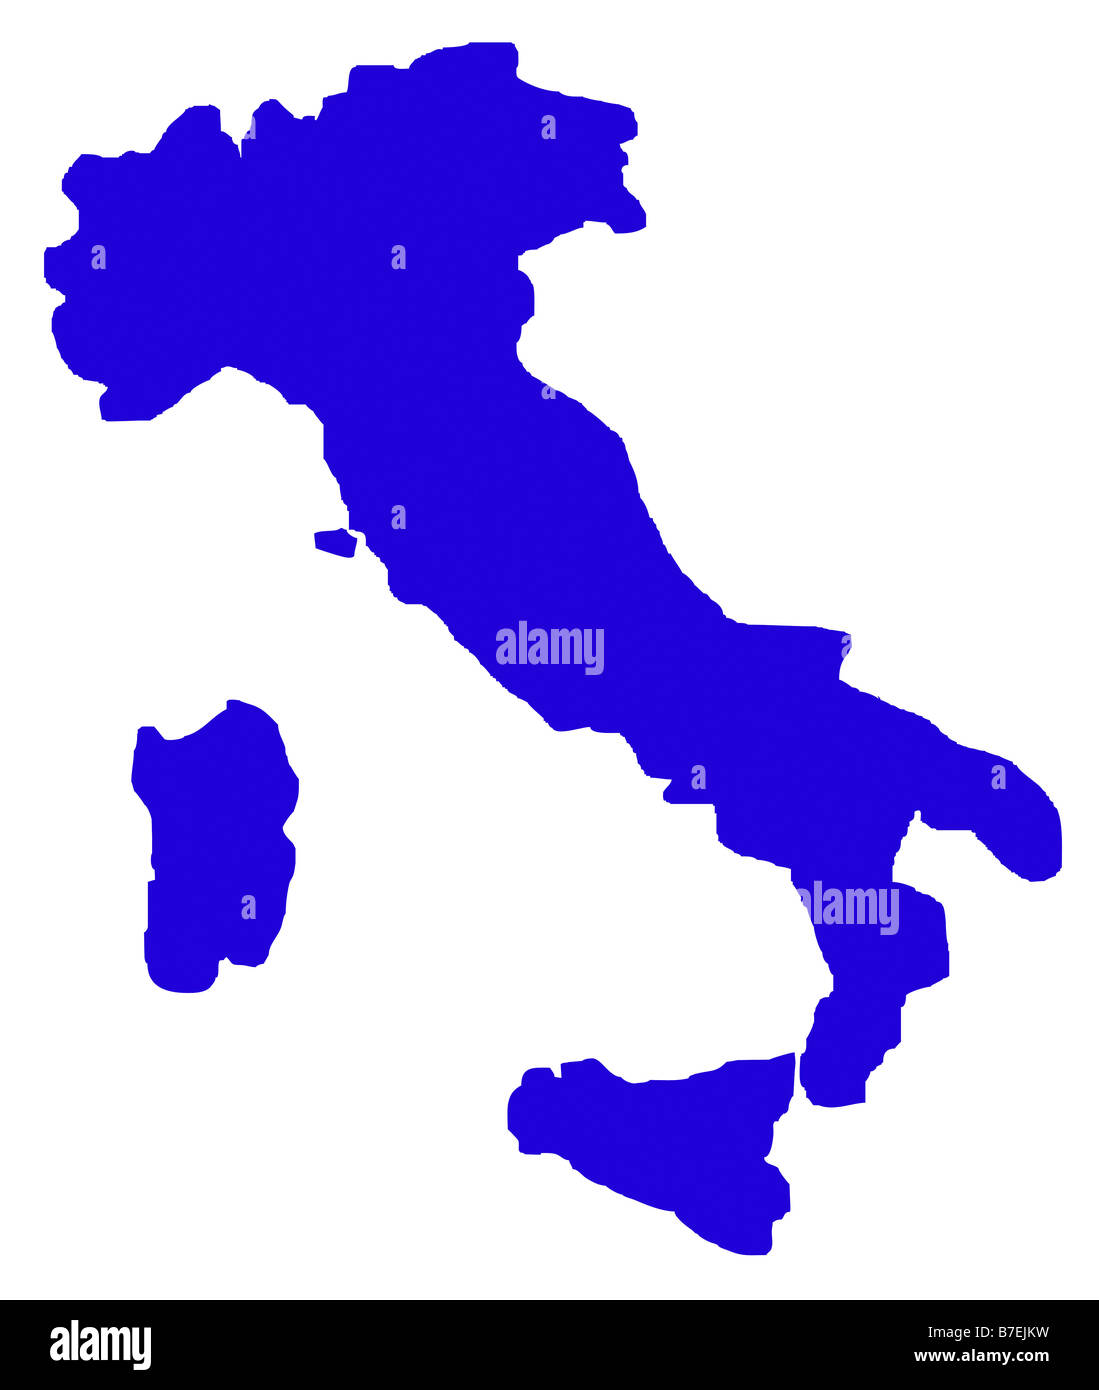 Outline map of Italy isolated on white background Stock Photo